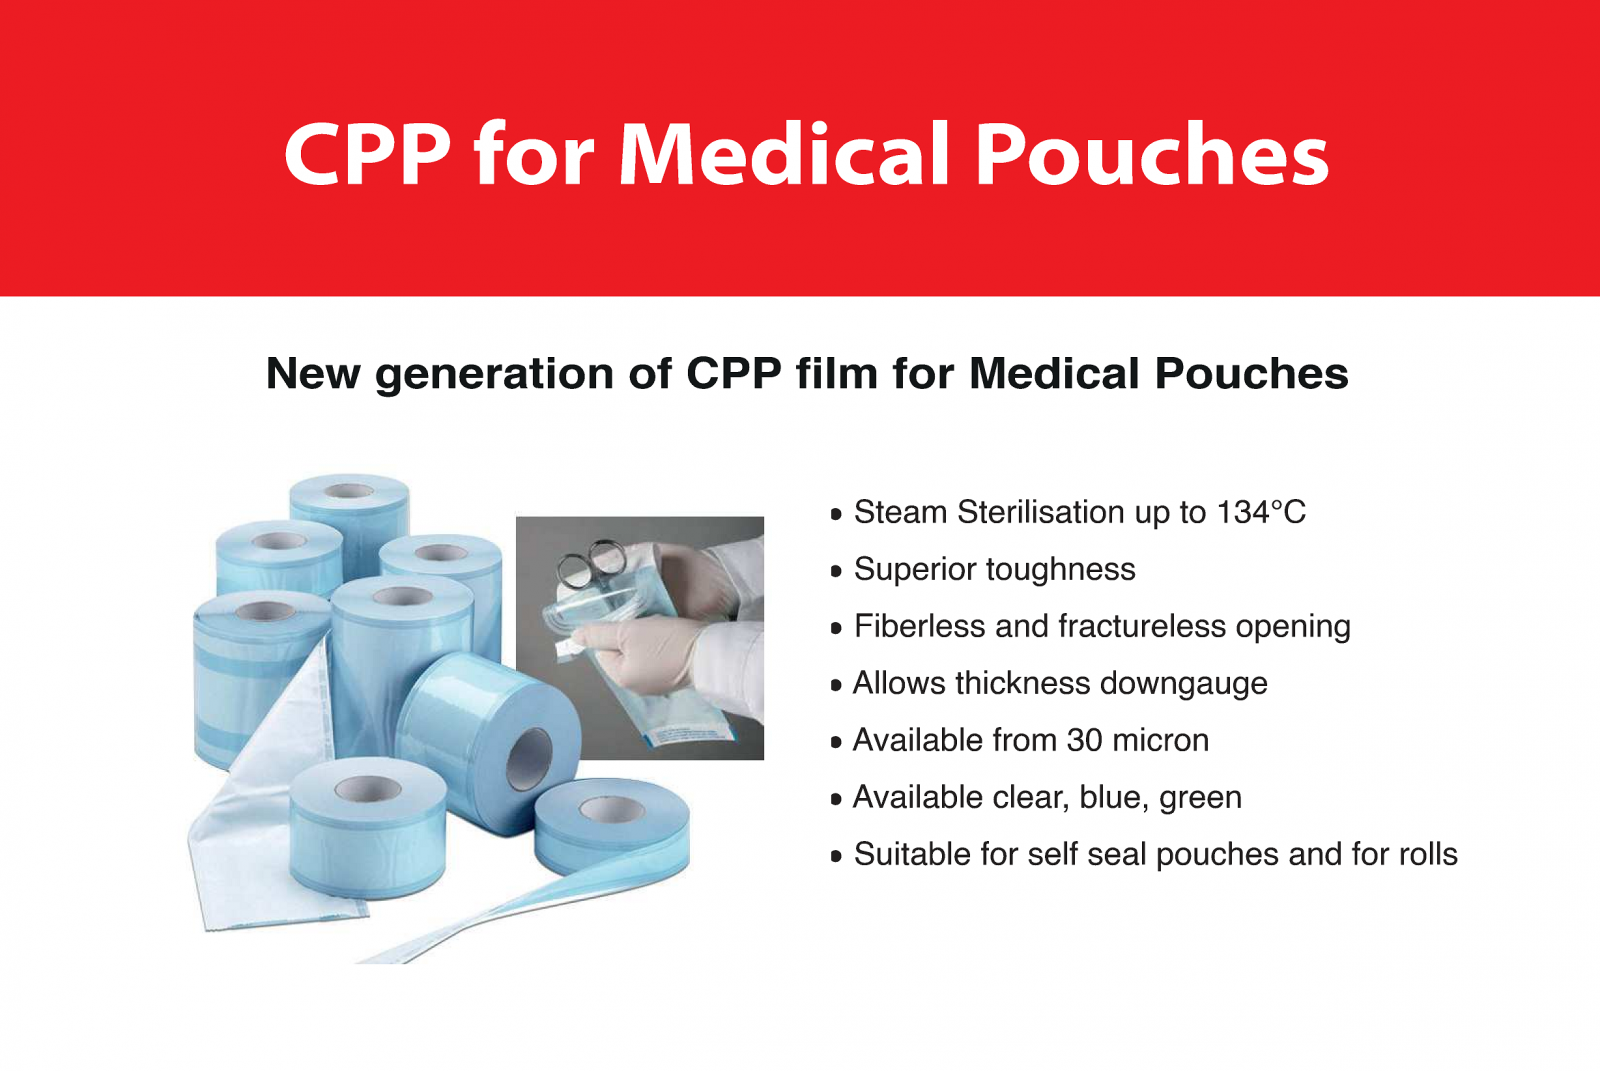 CPP_for_Medical_Pouches_RCM-41